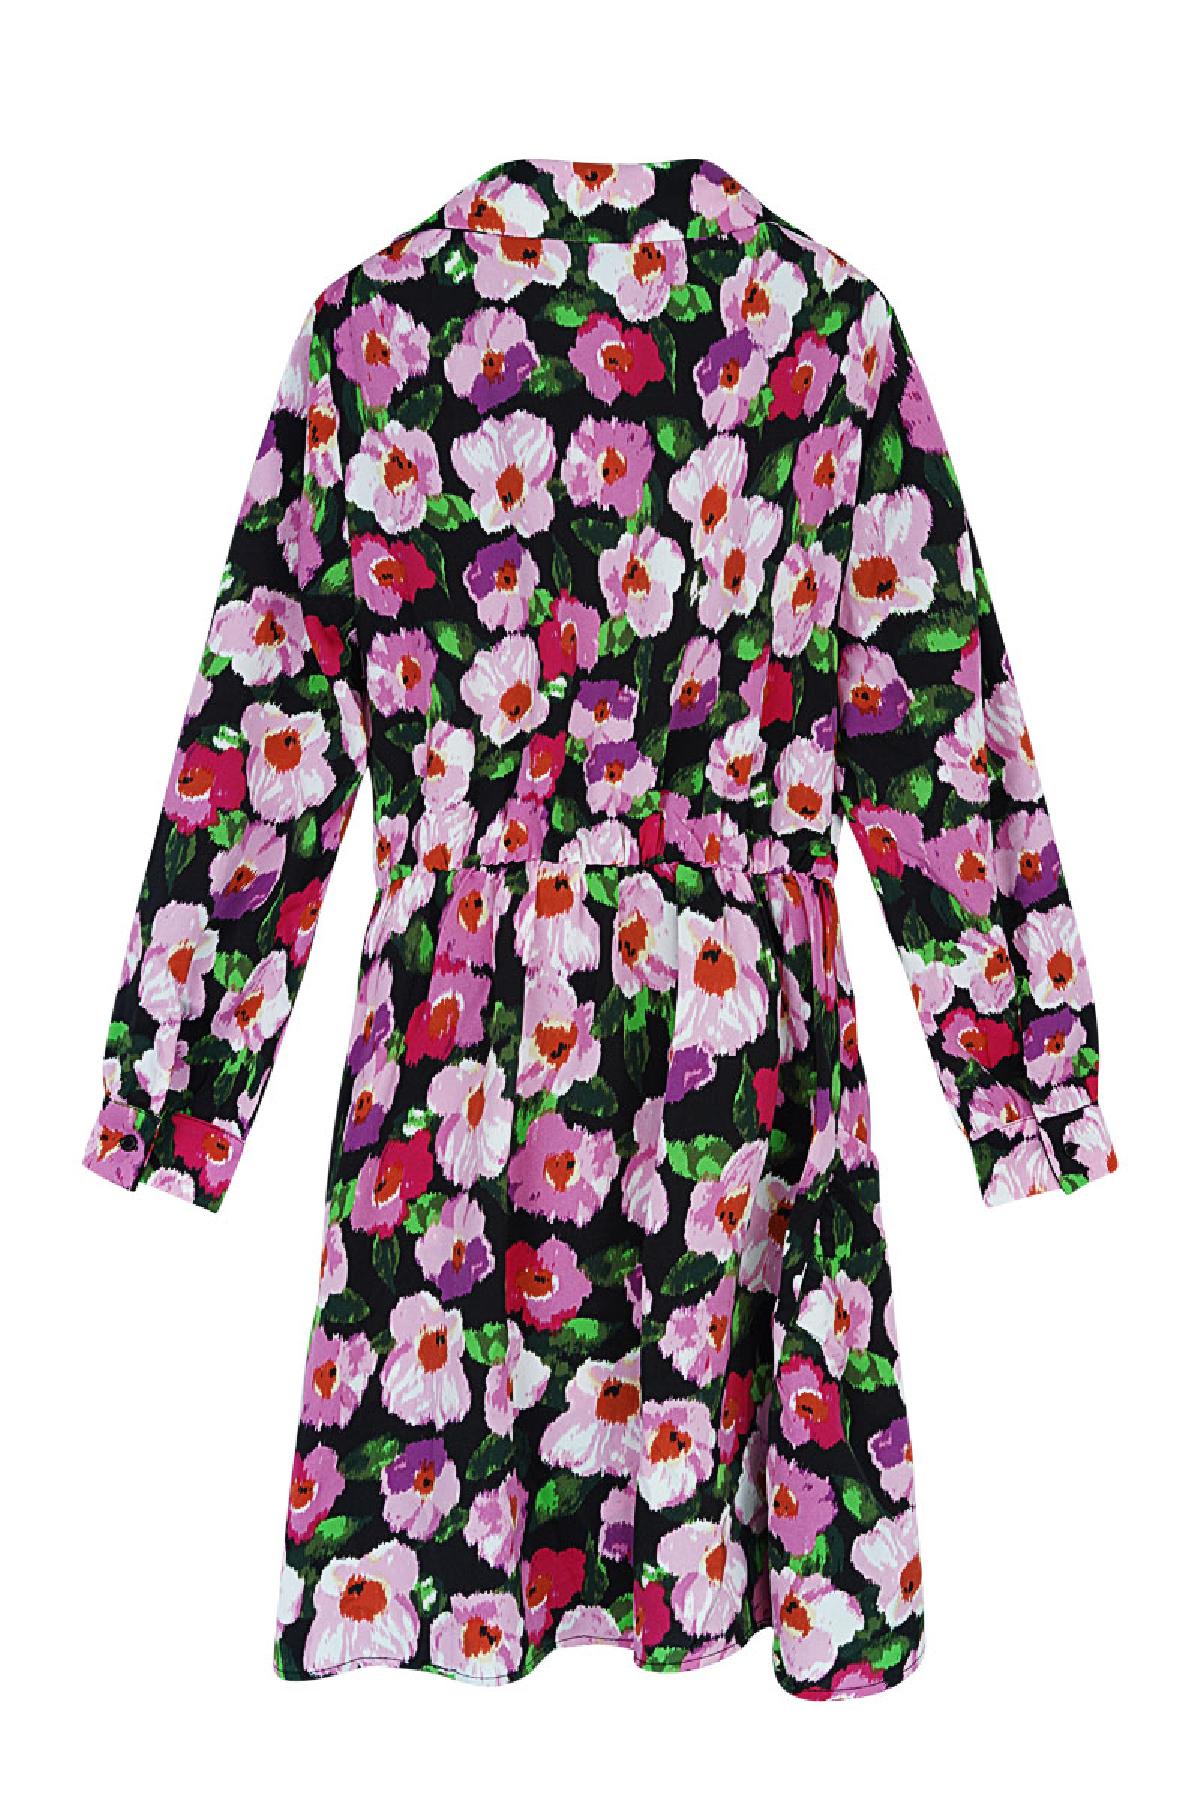 Flower print dress with button detail Black Multi M h5 Picture3